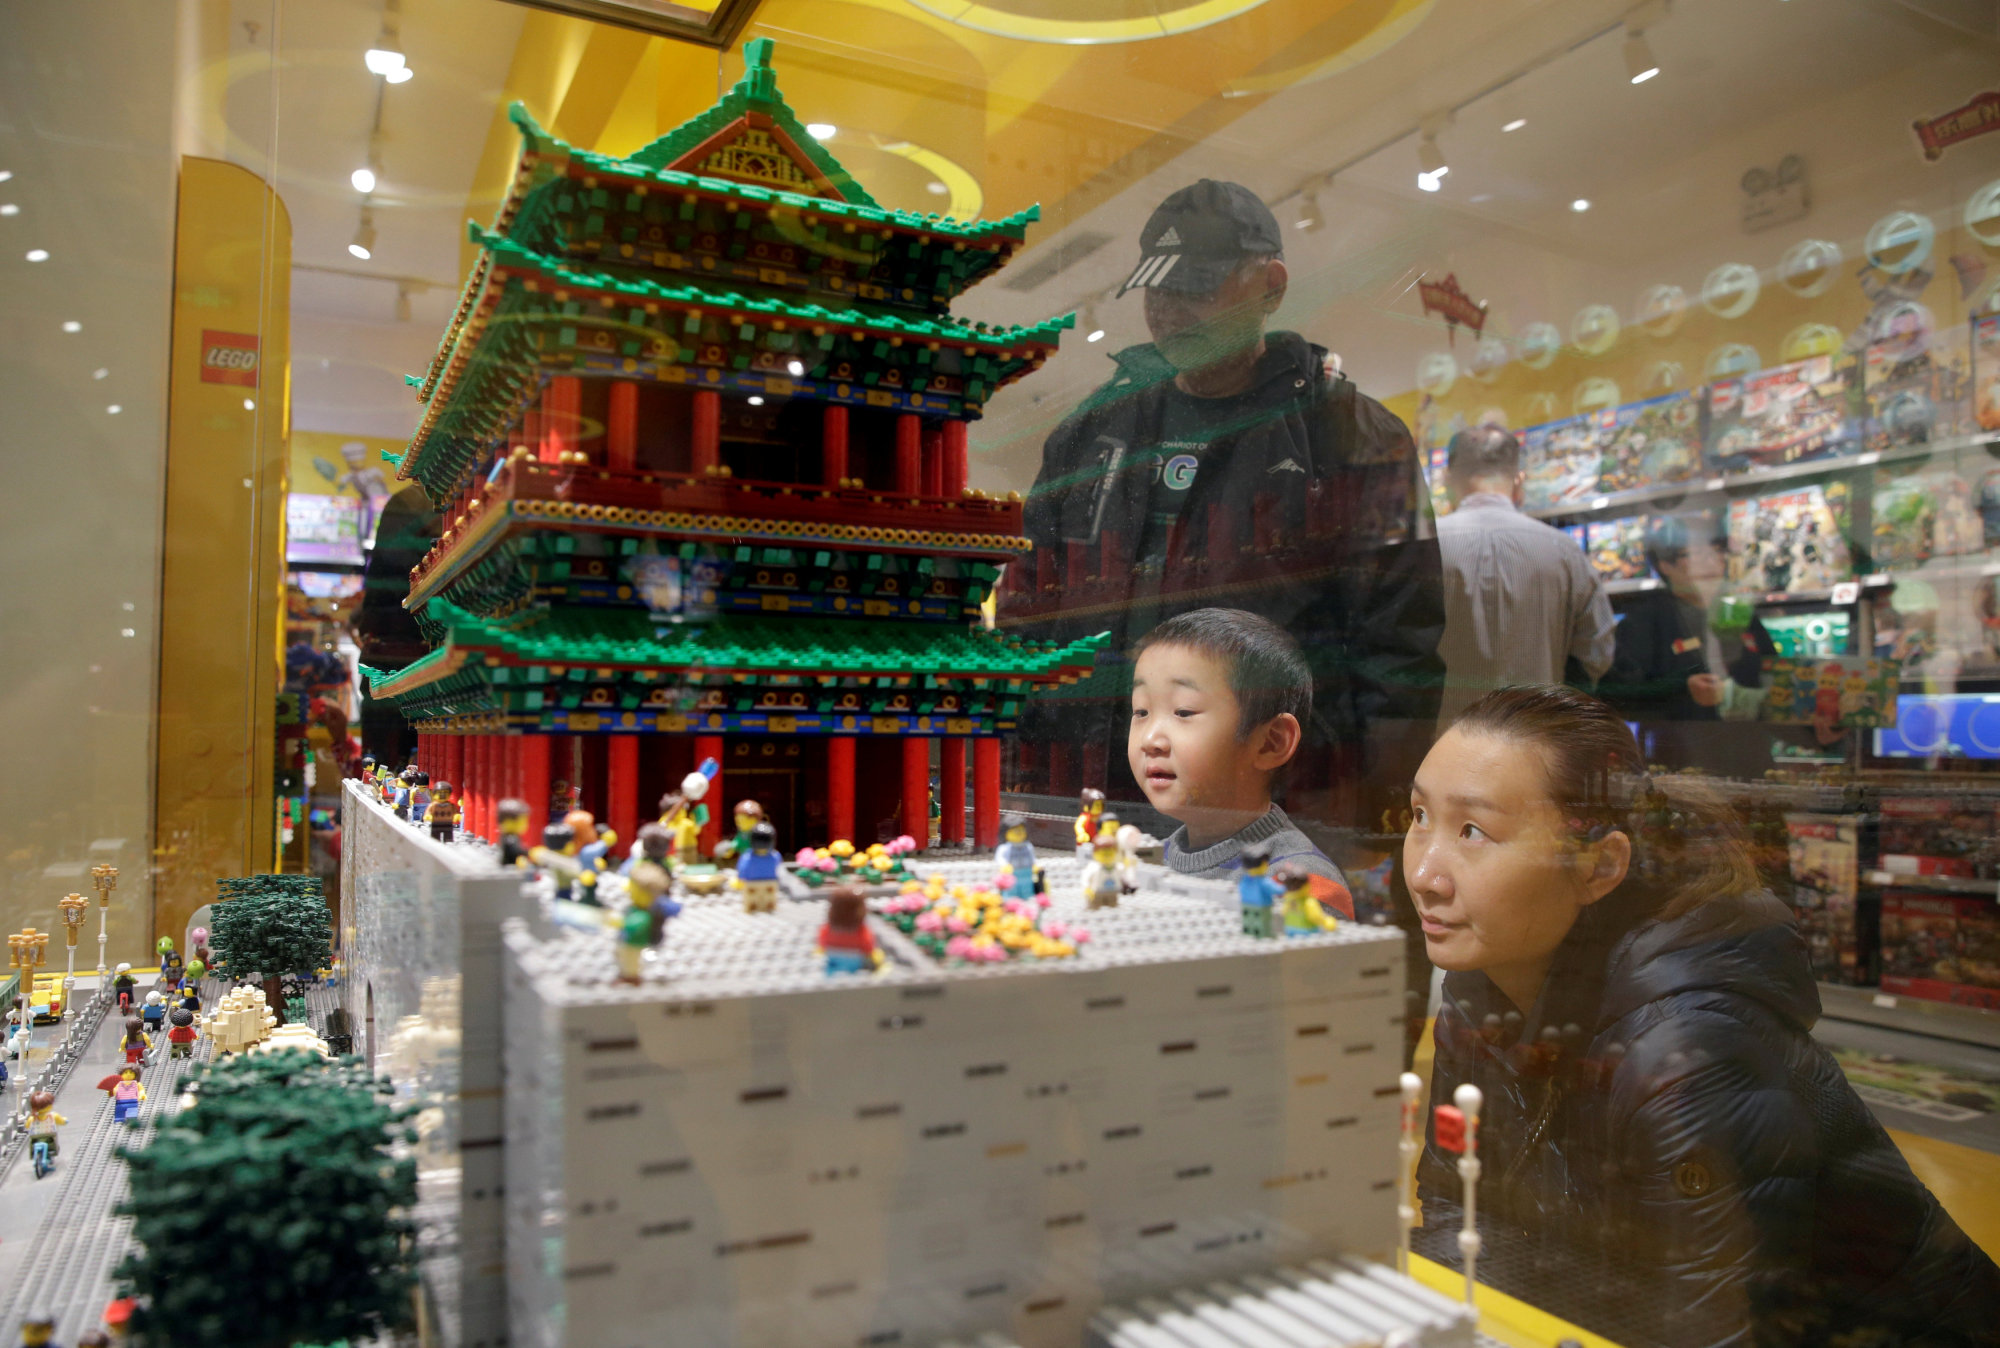 Lego to open 80 new toy shops in China this year - Japan Times